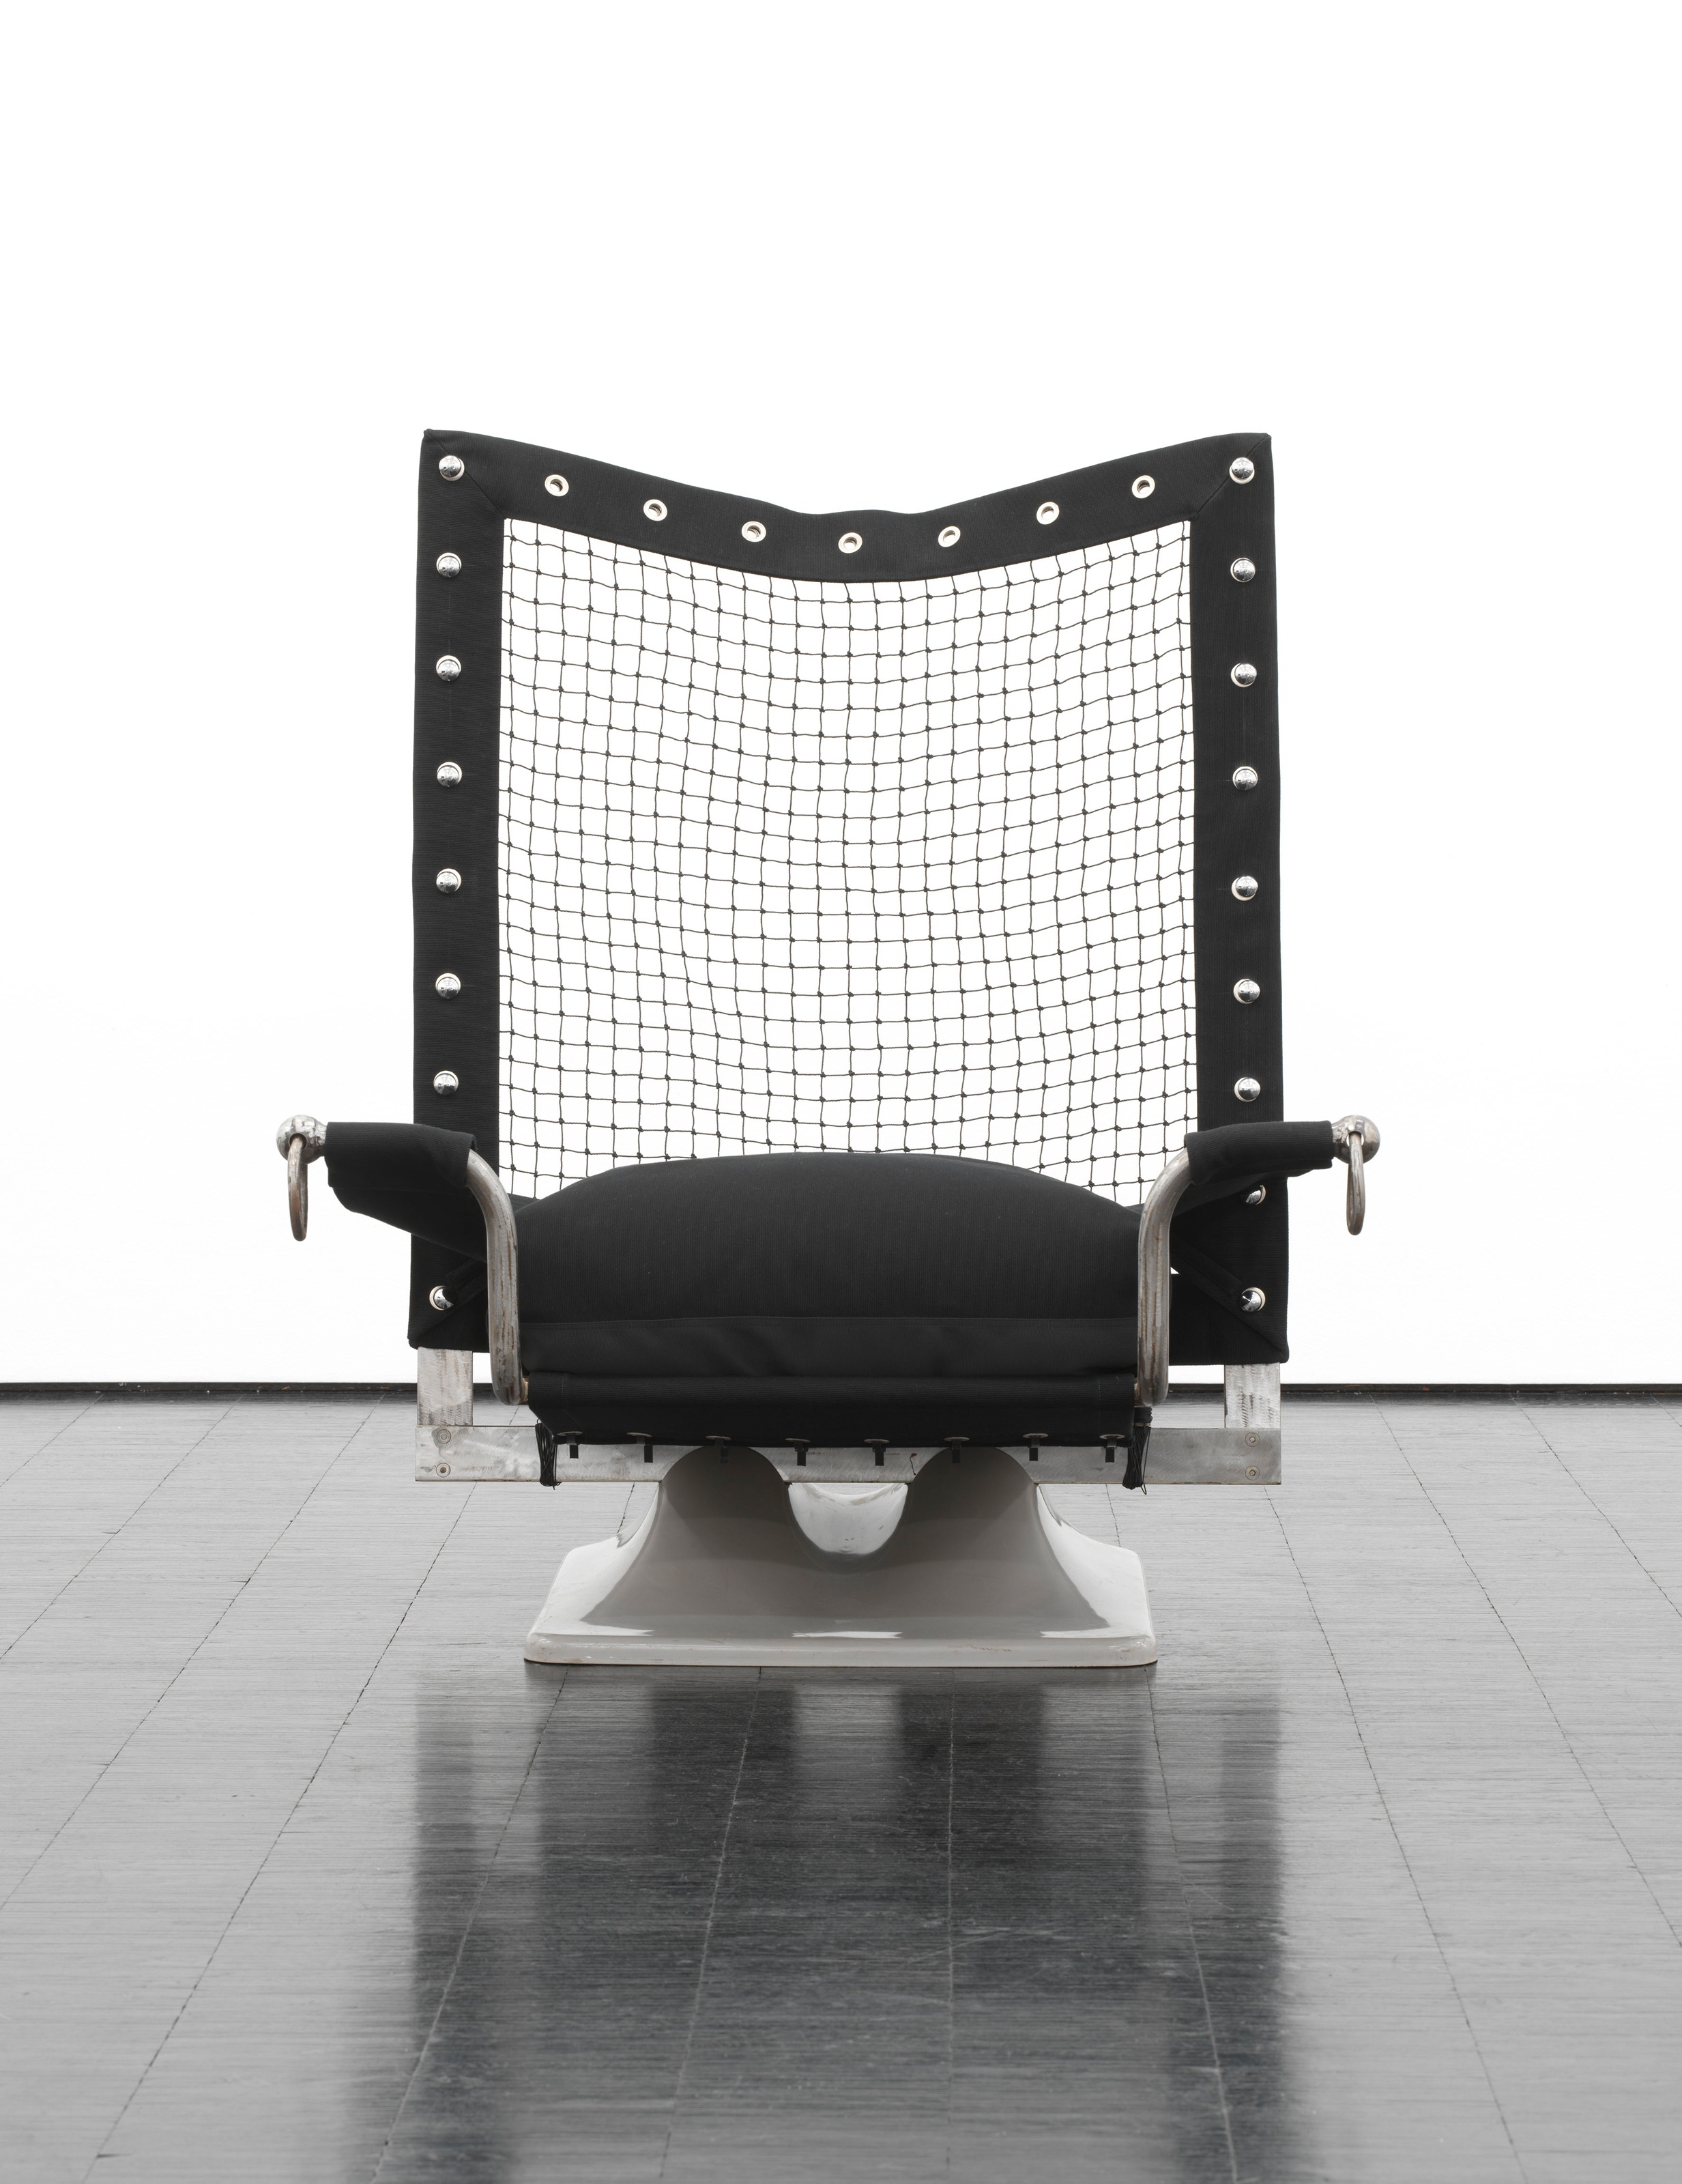 ConcordeAE(v)O Armchair, 2023plastic, iron, nickel, web, cotton and polypropylene110 x 80 x 80 cm | 43 1/3 x 31 1/2 x 31 1/2 in